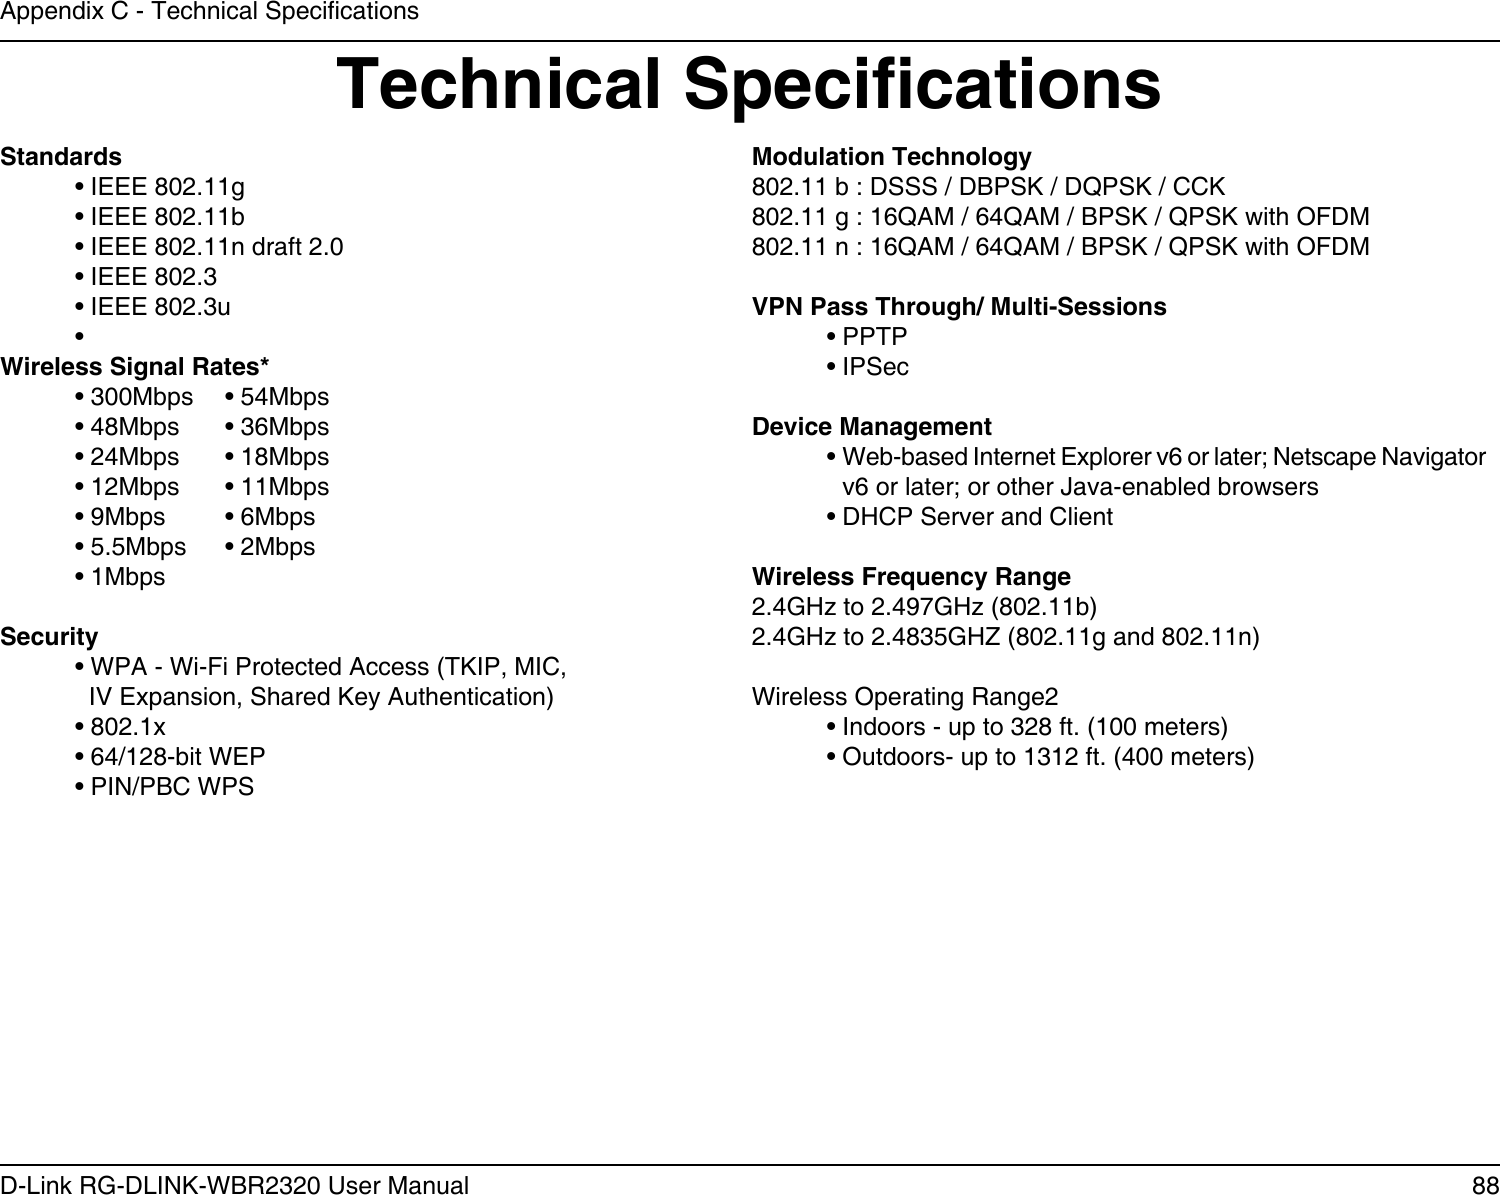 88D-Link RG-DLINK-WBR2320 User ManualAppendix C - Technical SpecicationsTechnical SpecicationsStandards  • IEEE 802.11g  • IEEE 802.11b  • IEEE 802.11n draft 2.0  • IEEE 802.3  • IEEE 802.3u  • Wireless Signal Rates*  • 300Mbps  • 54Mbps   • 48Mbps  • 36Mbps  • 24Mbps  • 18Mbps  • 12Mbps  • 11Mbps   • 9Mbps  • 6Mbps   • 5.5Mbps  • 2Mbps   • 1MbpsSecurity  • WPA - Wi-Fi Protected Access (TKIP, MIC,    IV Expansion, Shared Key Authentication)  • 802.1x  • 64/128-bit WEP  • PIN/PBC WPSModulation Technology802.11 b : DSSS / DBPSK / DQPSK / CCK802.11 g : 16QAM / 64QAM / BPSK / QPSK with OFDM 802.11 n : 16QAM / 64QAM / BPSK / QPSK with OFDMVPN Pass Through/ Multi-Sessions  • PPTP   • IPSecDevice Management  •  Web-based Internet Explorer v6 or later; Netscape Navigator v6 or later; or other Java-enabled browsers  • DHCP Server and ClientWireless Frequency Range2.4GHz to 2.497GHz (802.11b)2.4GHz to 2.4835GHZ (802.11g and 802.11n)Wireless Operating Range2  • Indoors - up to 328 ft. (100 meters)  • Outdoors- up to 1312 ft. (400 meters)